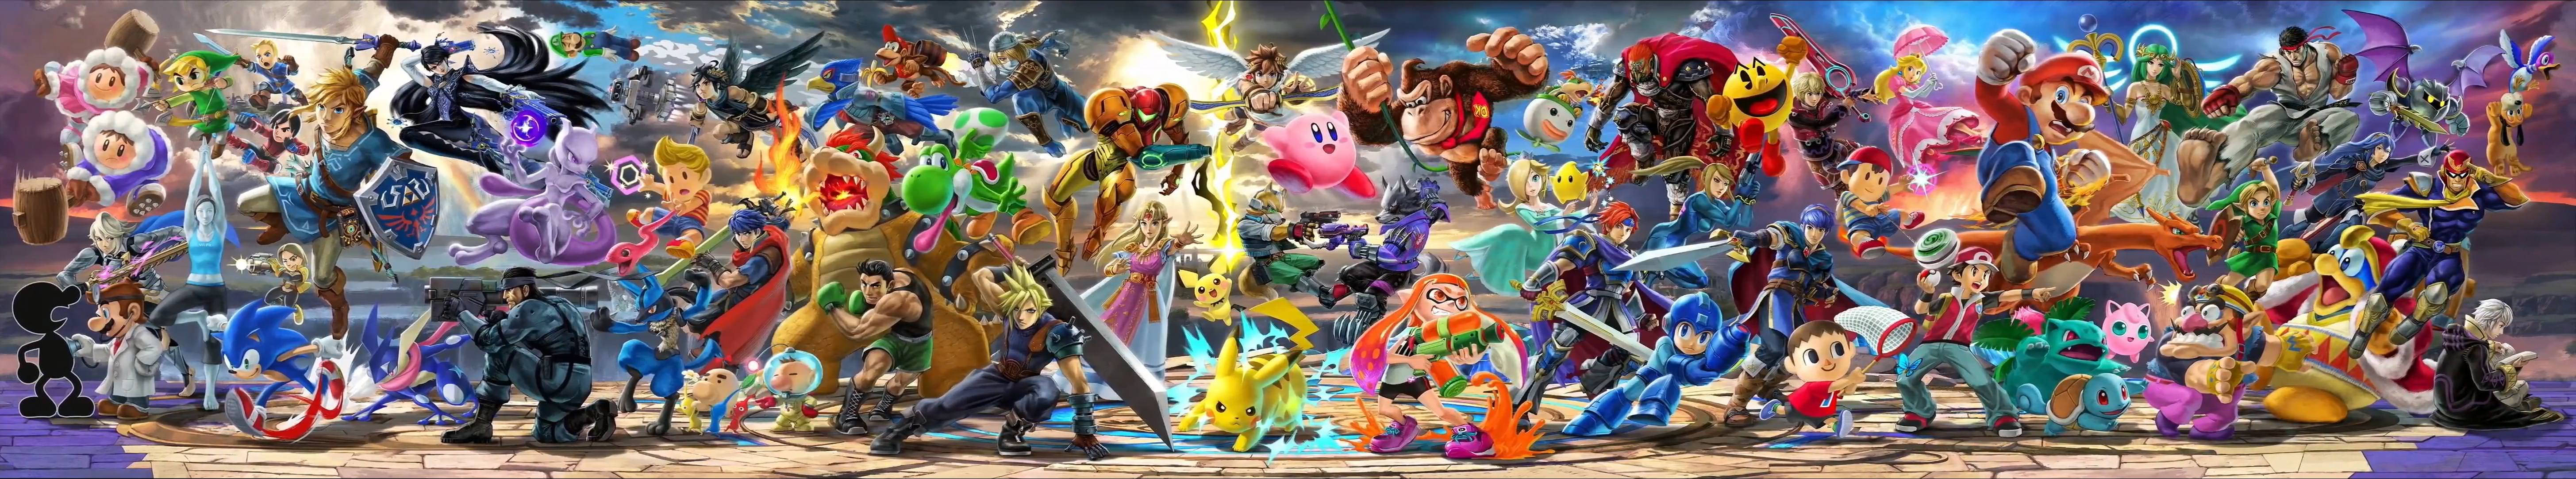 All Your Favourite Heroes Unite in Super Smash Bros Ultimate Wallpaper